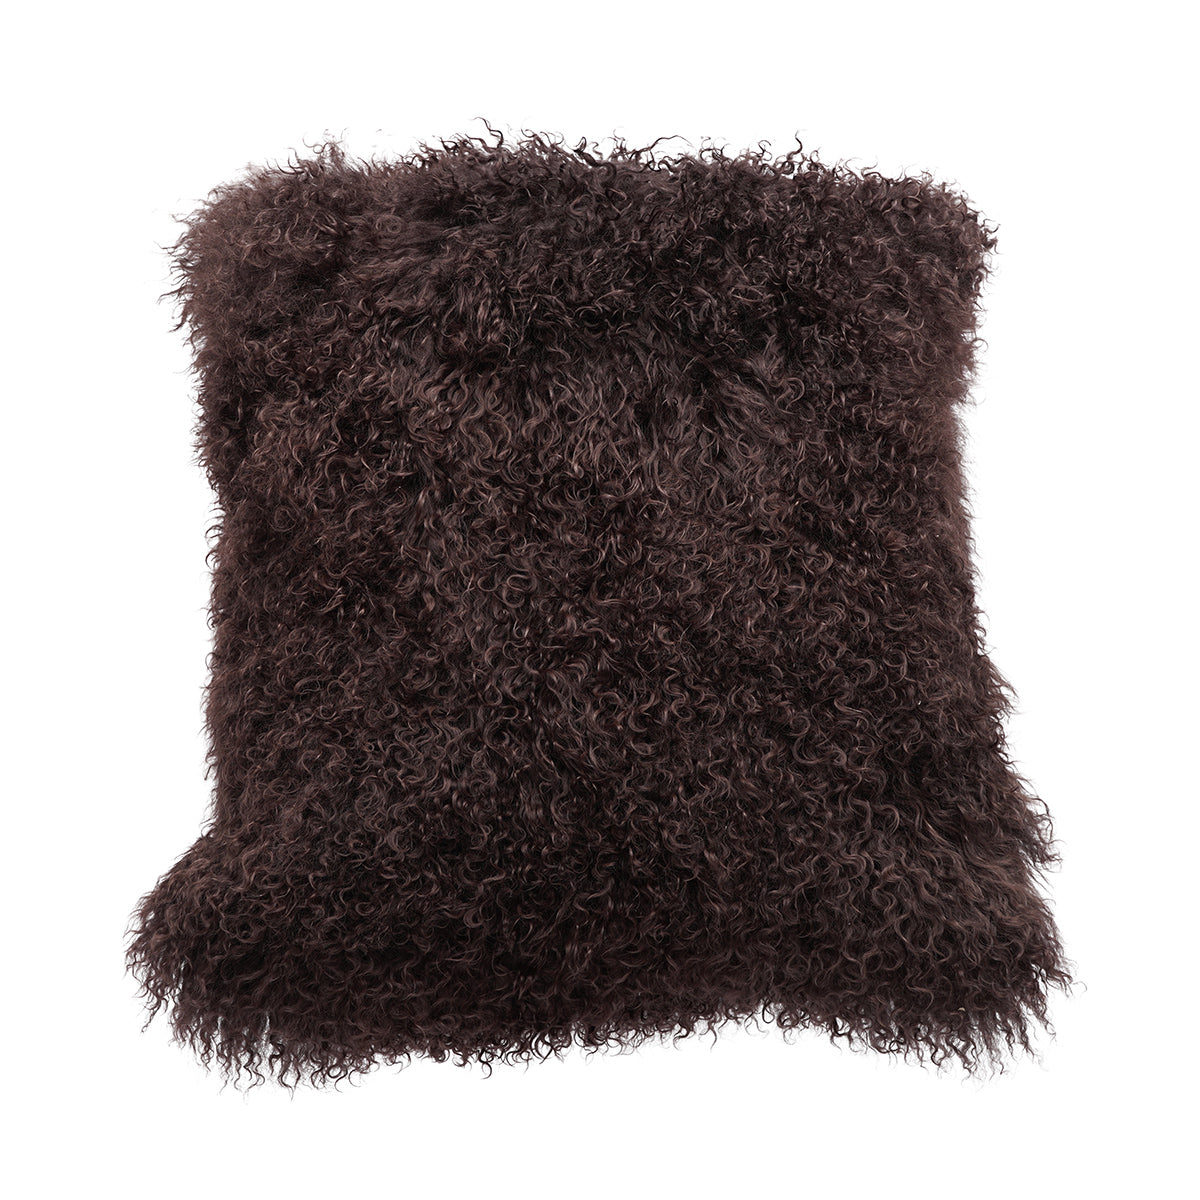 Tibetan Lamb Pillows are perfect for any home. Crafted with incredibly soft and luxurious fur, this pillow provides a one-of-a-kind accent to any room. The elegant texture and design adds a chic and sophisticated touch, and the multiple colors and sizes available make it the perfect finishing touch for any decor.